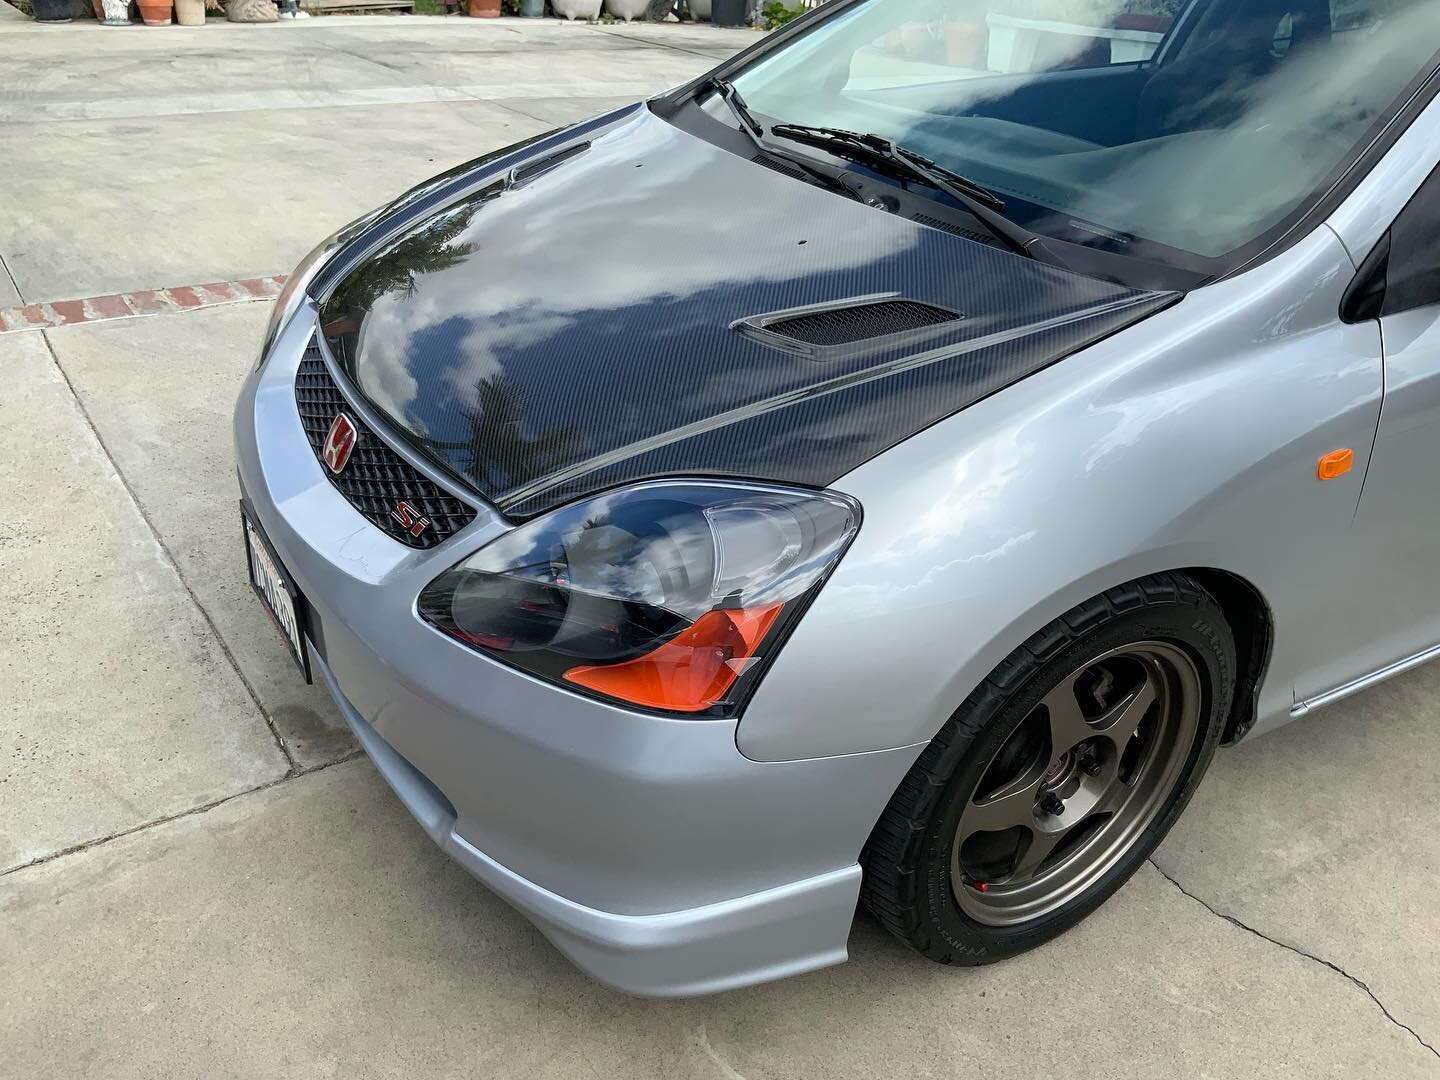 Client taken care with Seibon Carbon Fiber MG Style Hood for 02-05 Honda Civic Si Hatchback EP3

🏎 Aftermarket Performance Parts
💰Financing available
📧 info@kenjigarage.com
📲 714-417-2698
🌎 Ship World Wide
💻 www.kenjigarage.com

#civicsi #civic